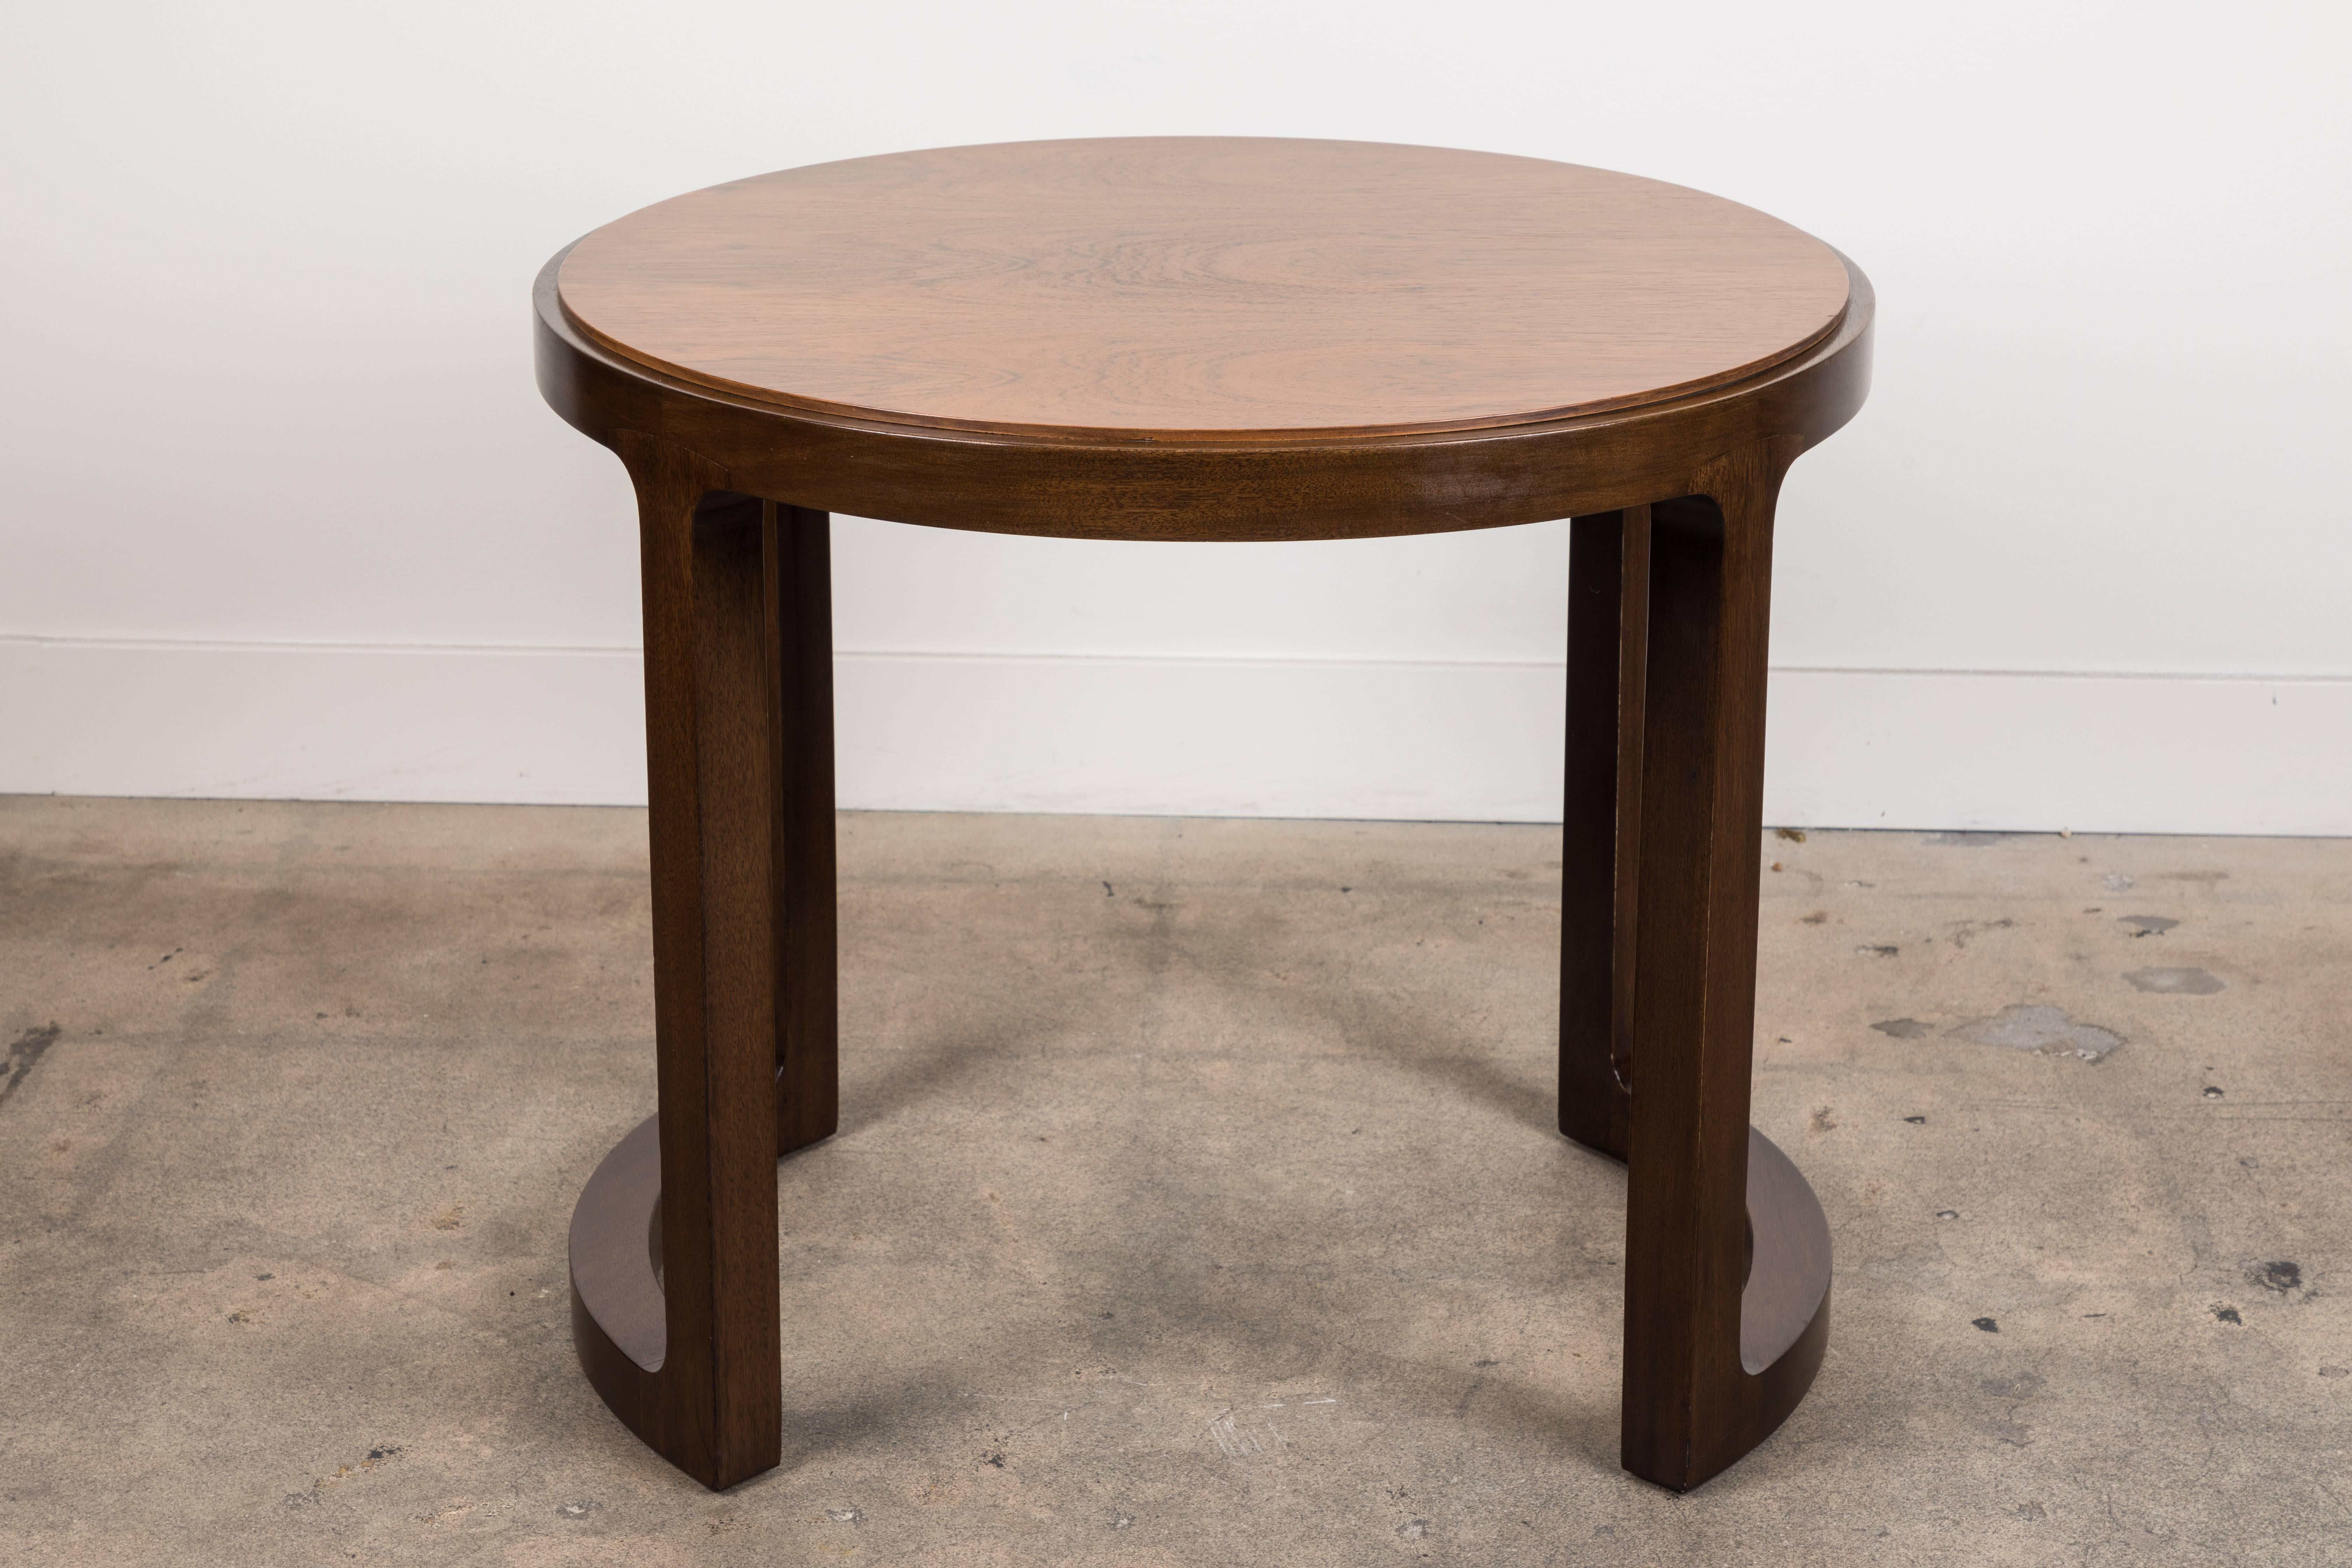 Pair of rosewood and mahogany side table by Edward Wormley for Dunbar.